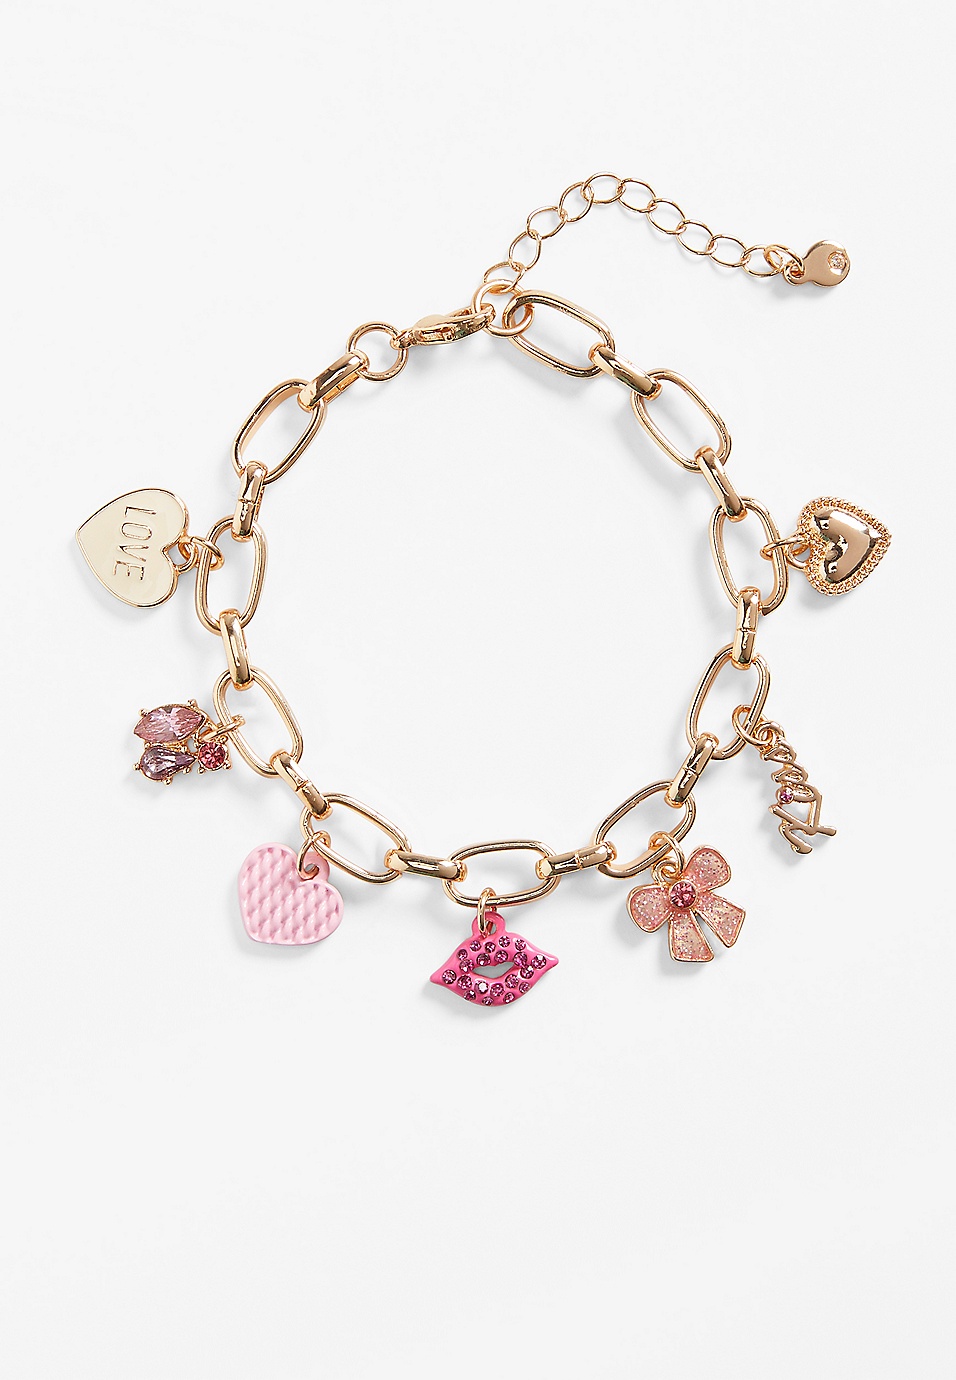 Valentine's Day Jewelry, Heart Bracelet and Romantic Charms